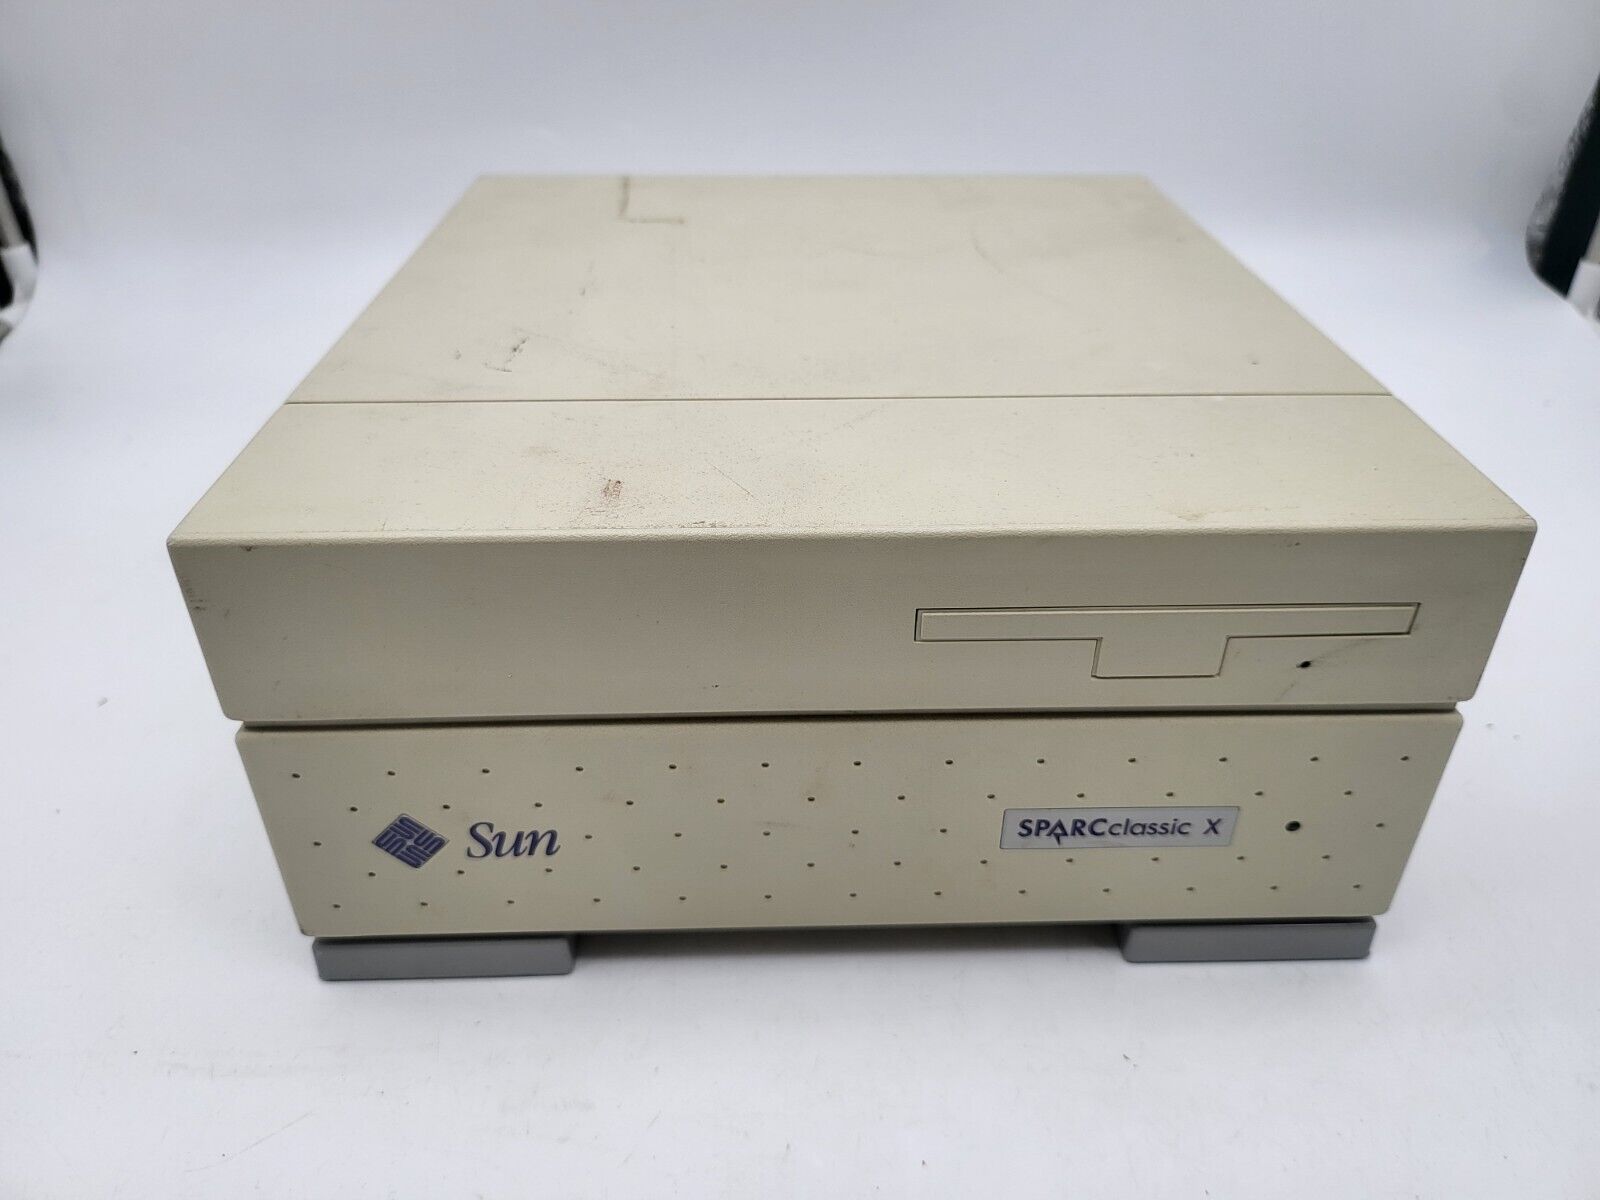 UNTESTED Sun Microsystems SPARC Classic SPARCassic X RARE AS IS